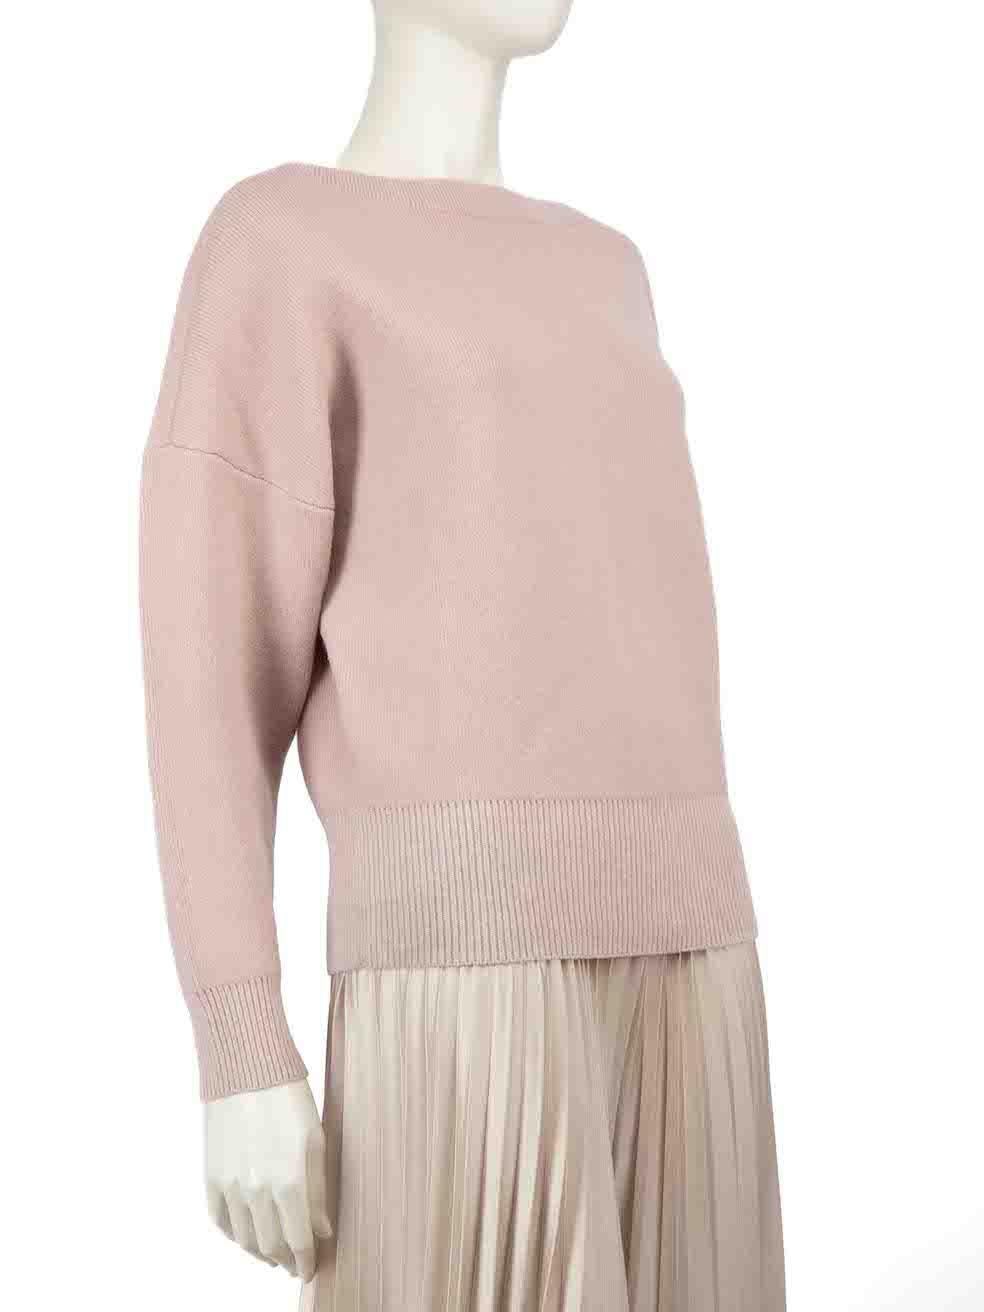 CONDITION is Very good. Hardly any visible wear to the jumper is evident on this used Isabel Marant √àtoile designer resale item.
 
 
 
 Details
 
 
 Pink
 
 Wool
 
 Knit jumper
 
 Long sleeves
 
 Round neck
 
 Stretchy
 
 
 
 
 
 Made in China
 
 
